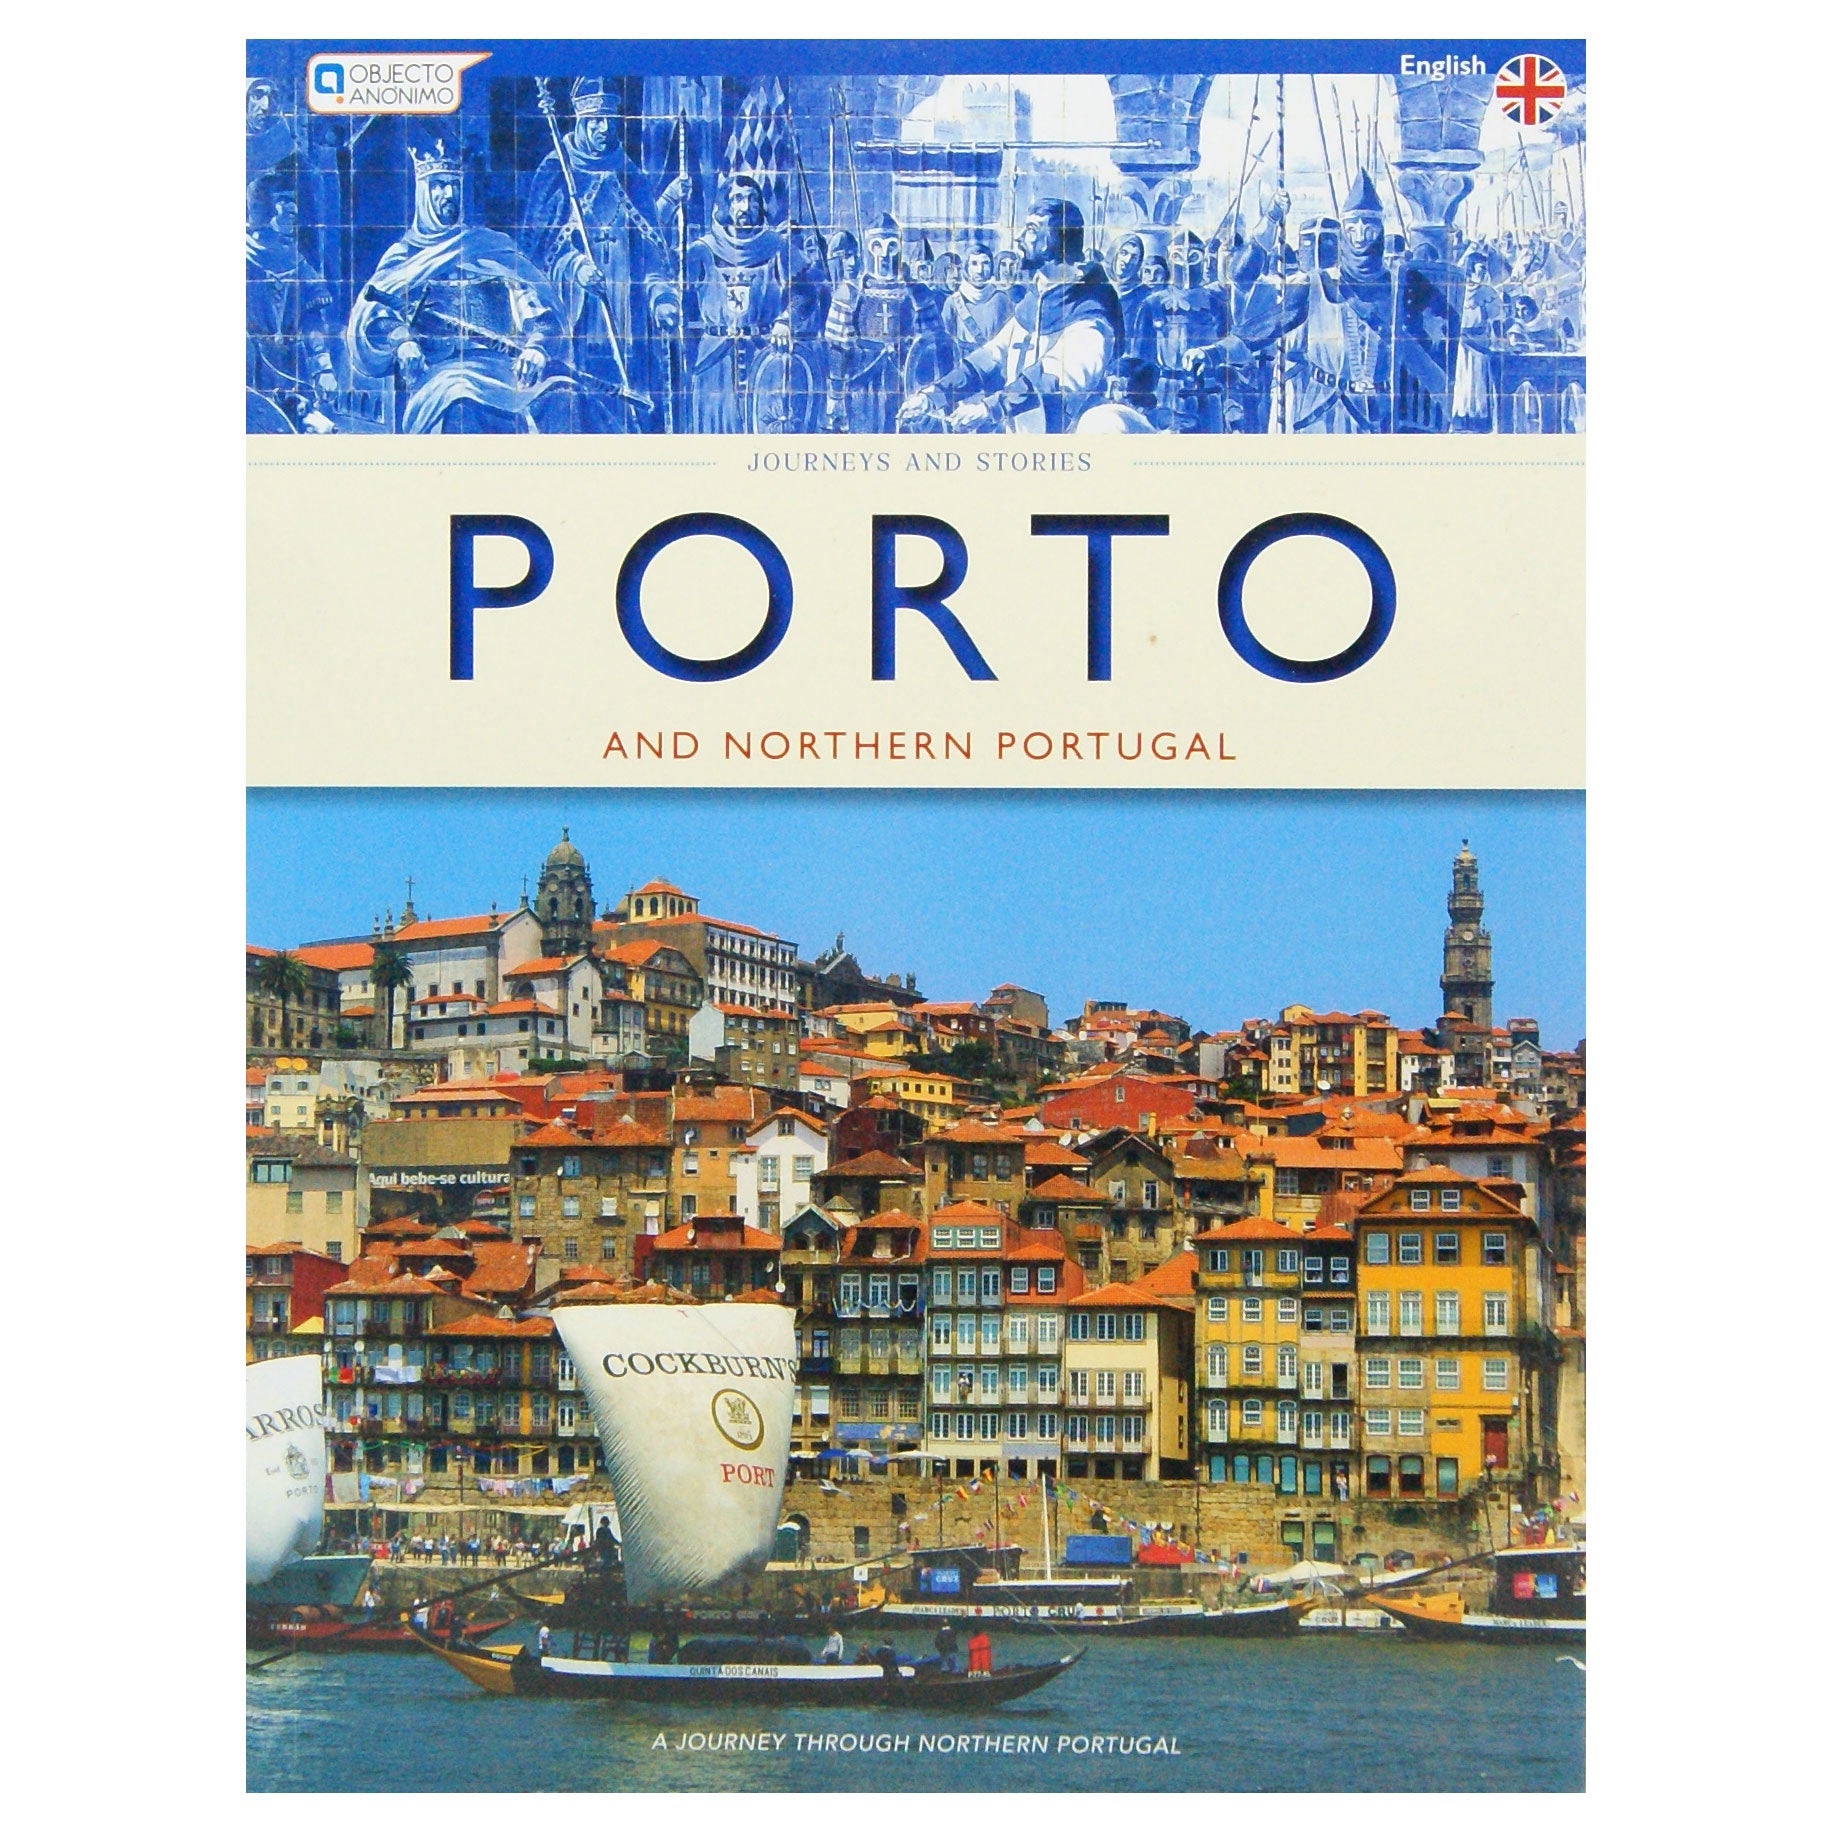 Portugal　Northern　Stories　Journeys　Portugal　We　and　–　and　Porto　Are